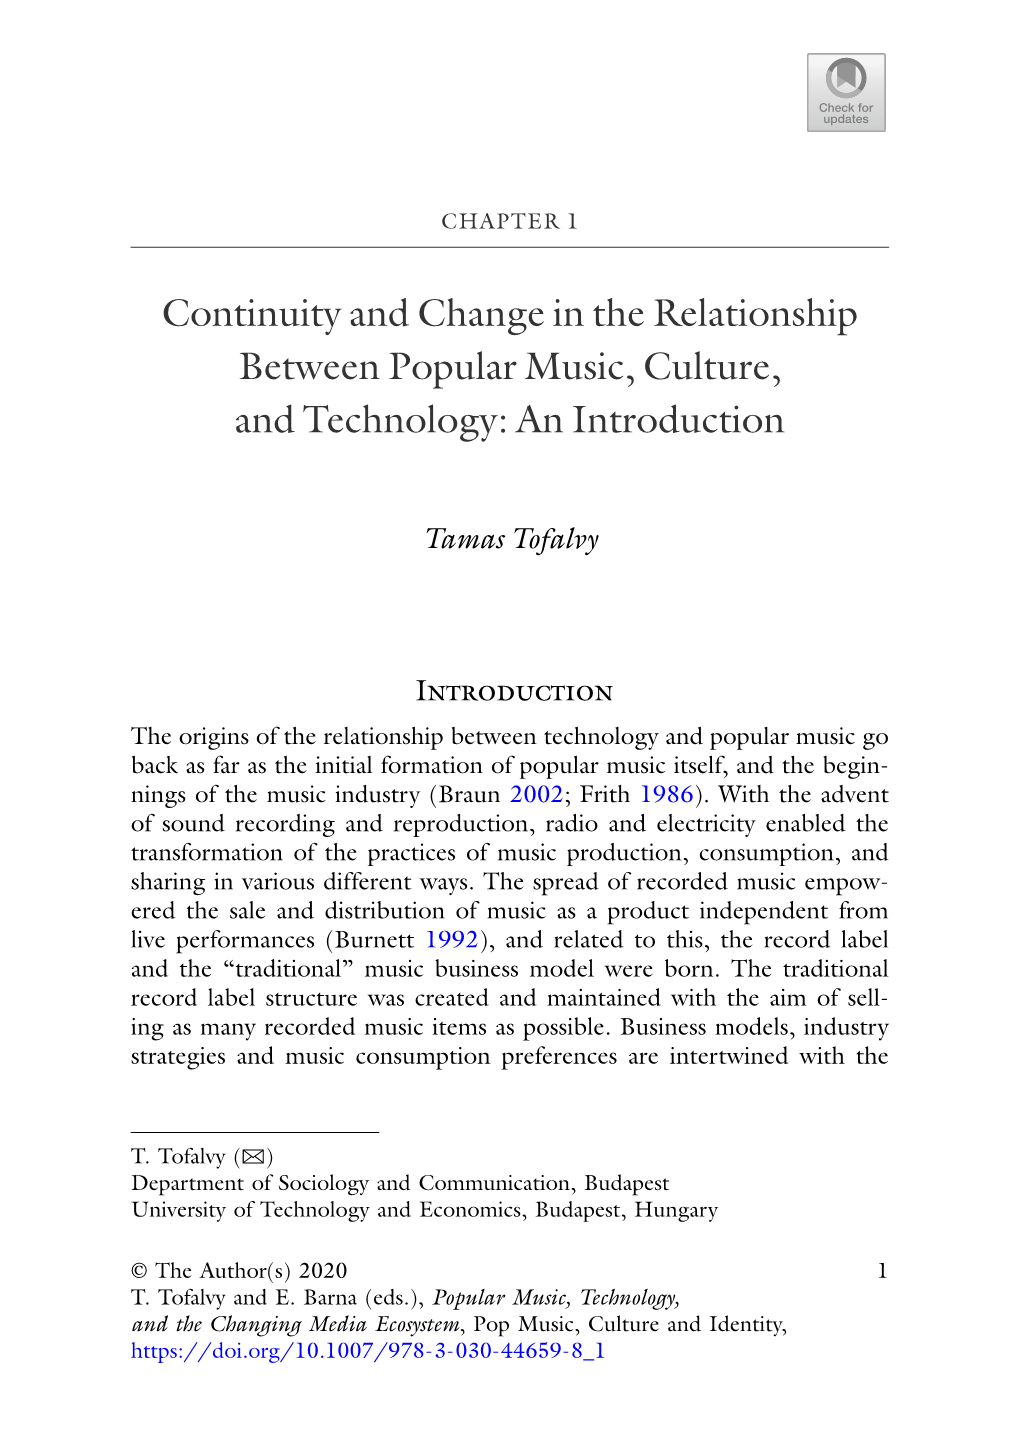 Continuity and Change in the Relationship Between Popular Music, Culture, and Technology: an Introduction